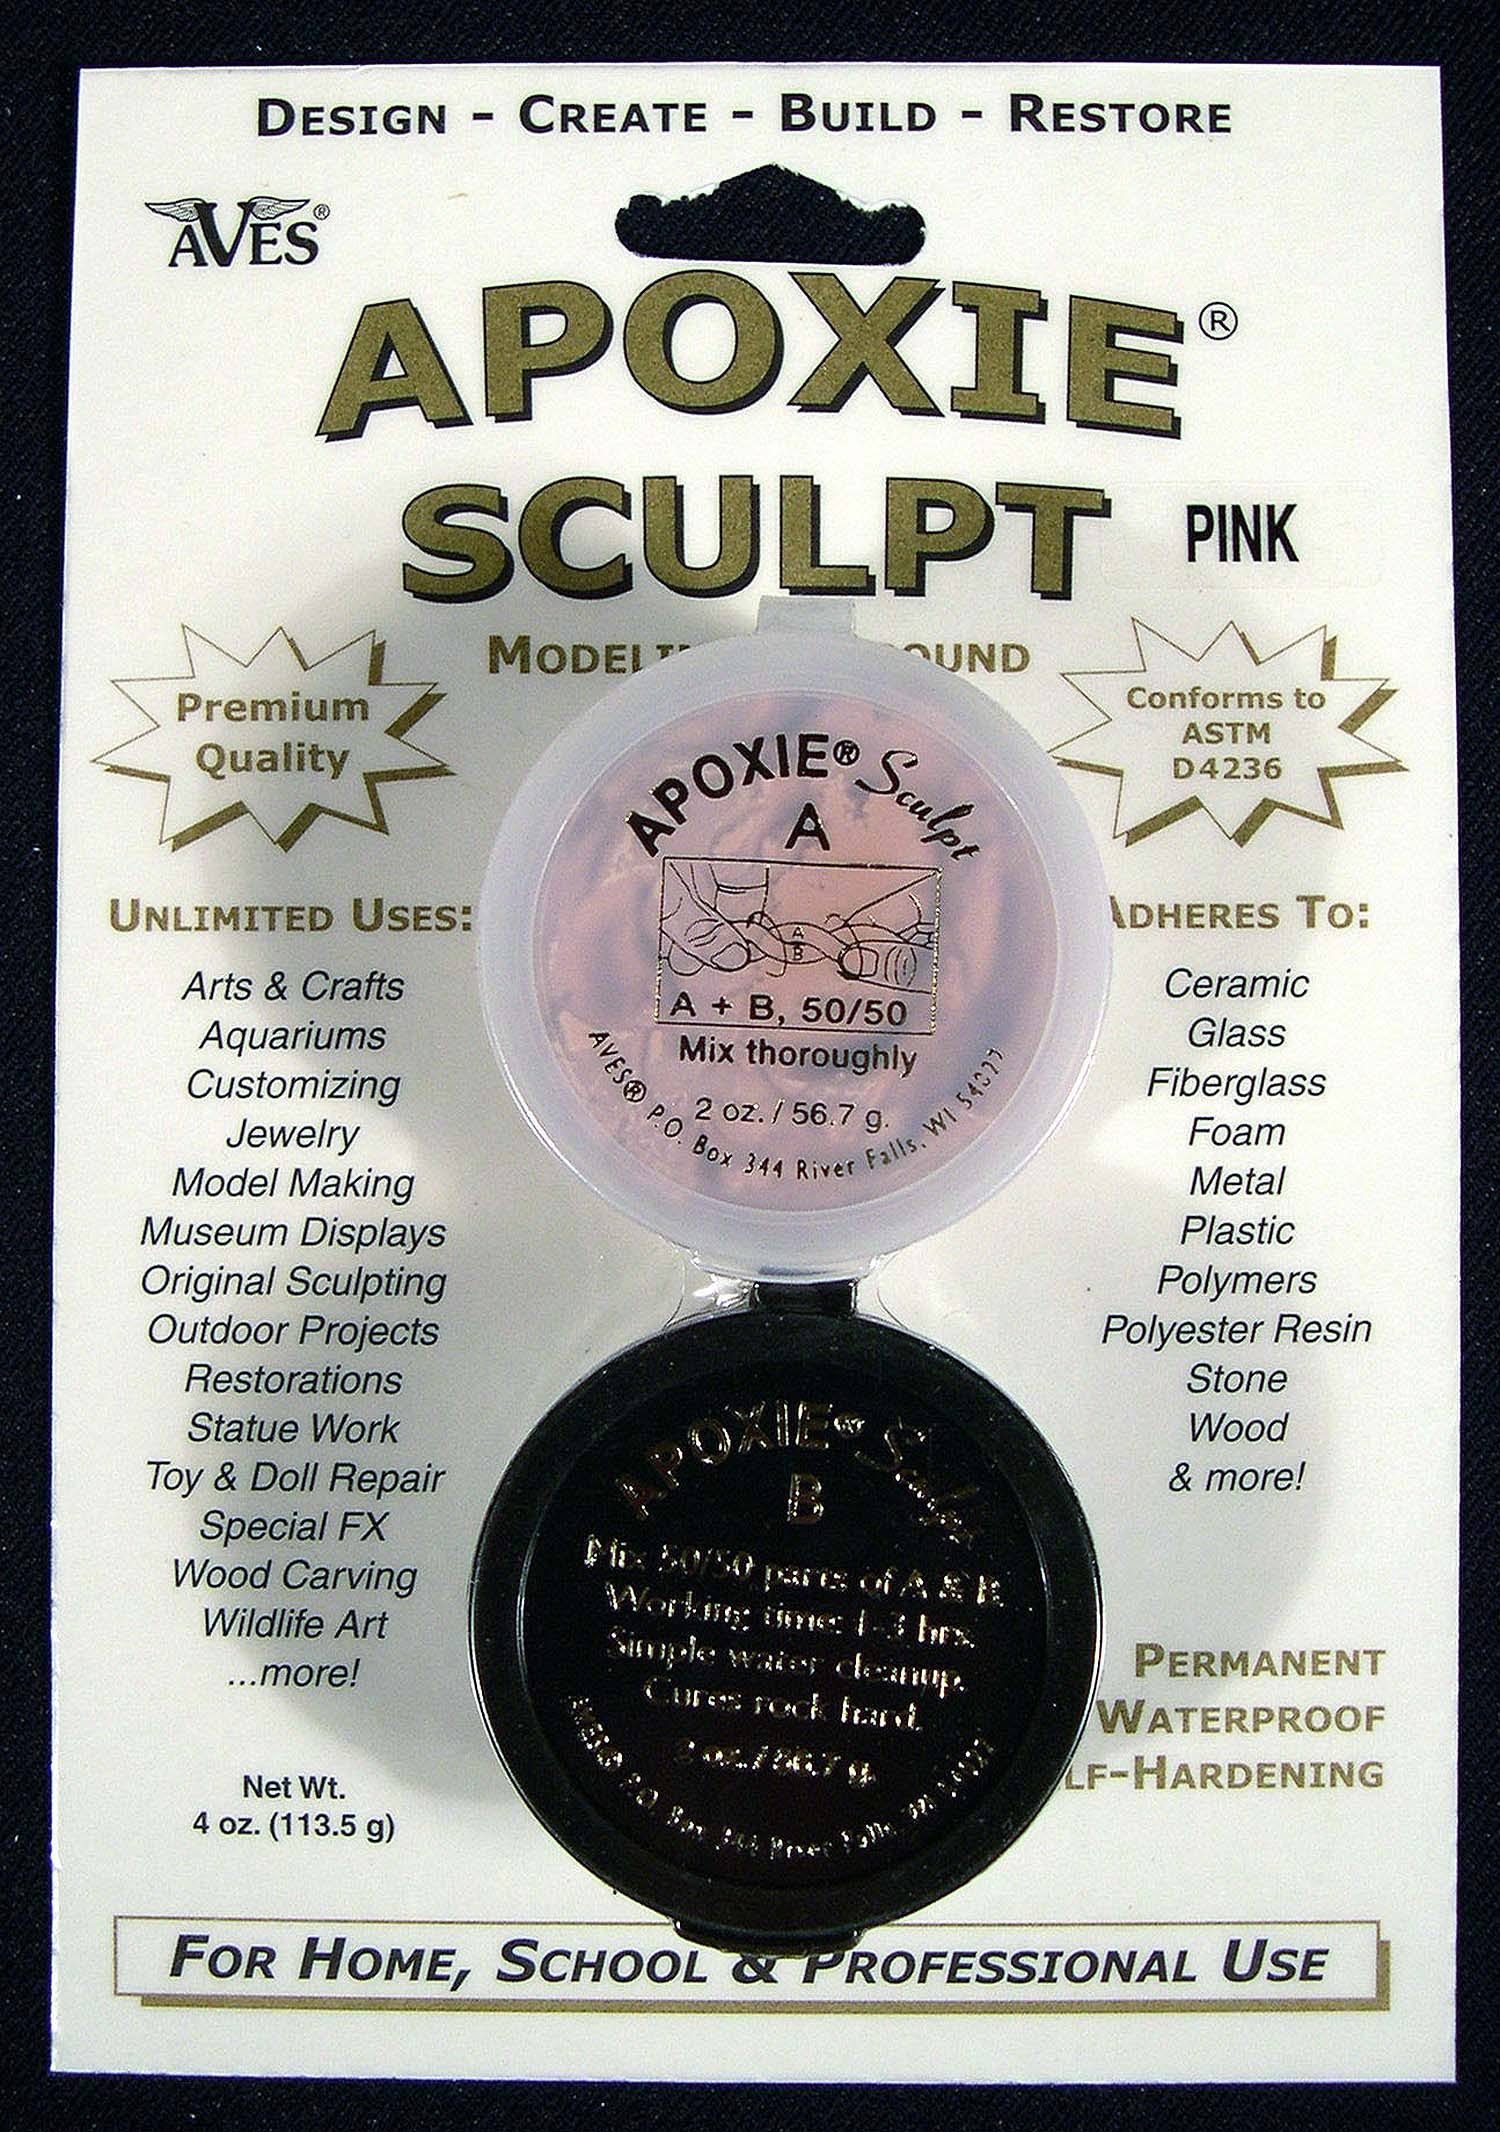 Aves Apoxie Sculpt Pink 2-Part Self-Hardening Modeling Compound 1/4 lb